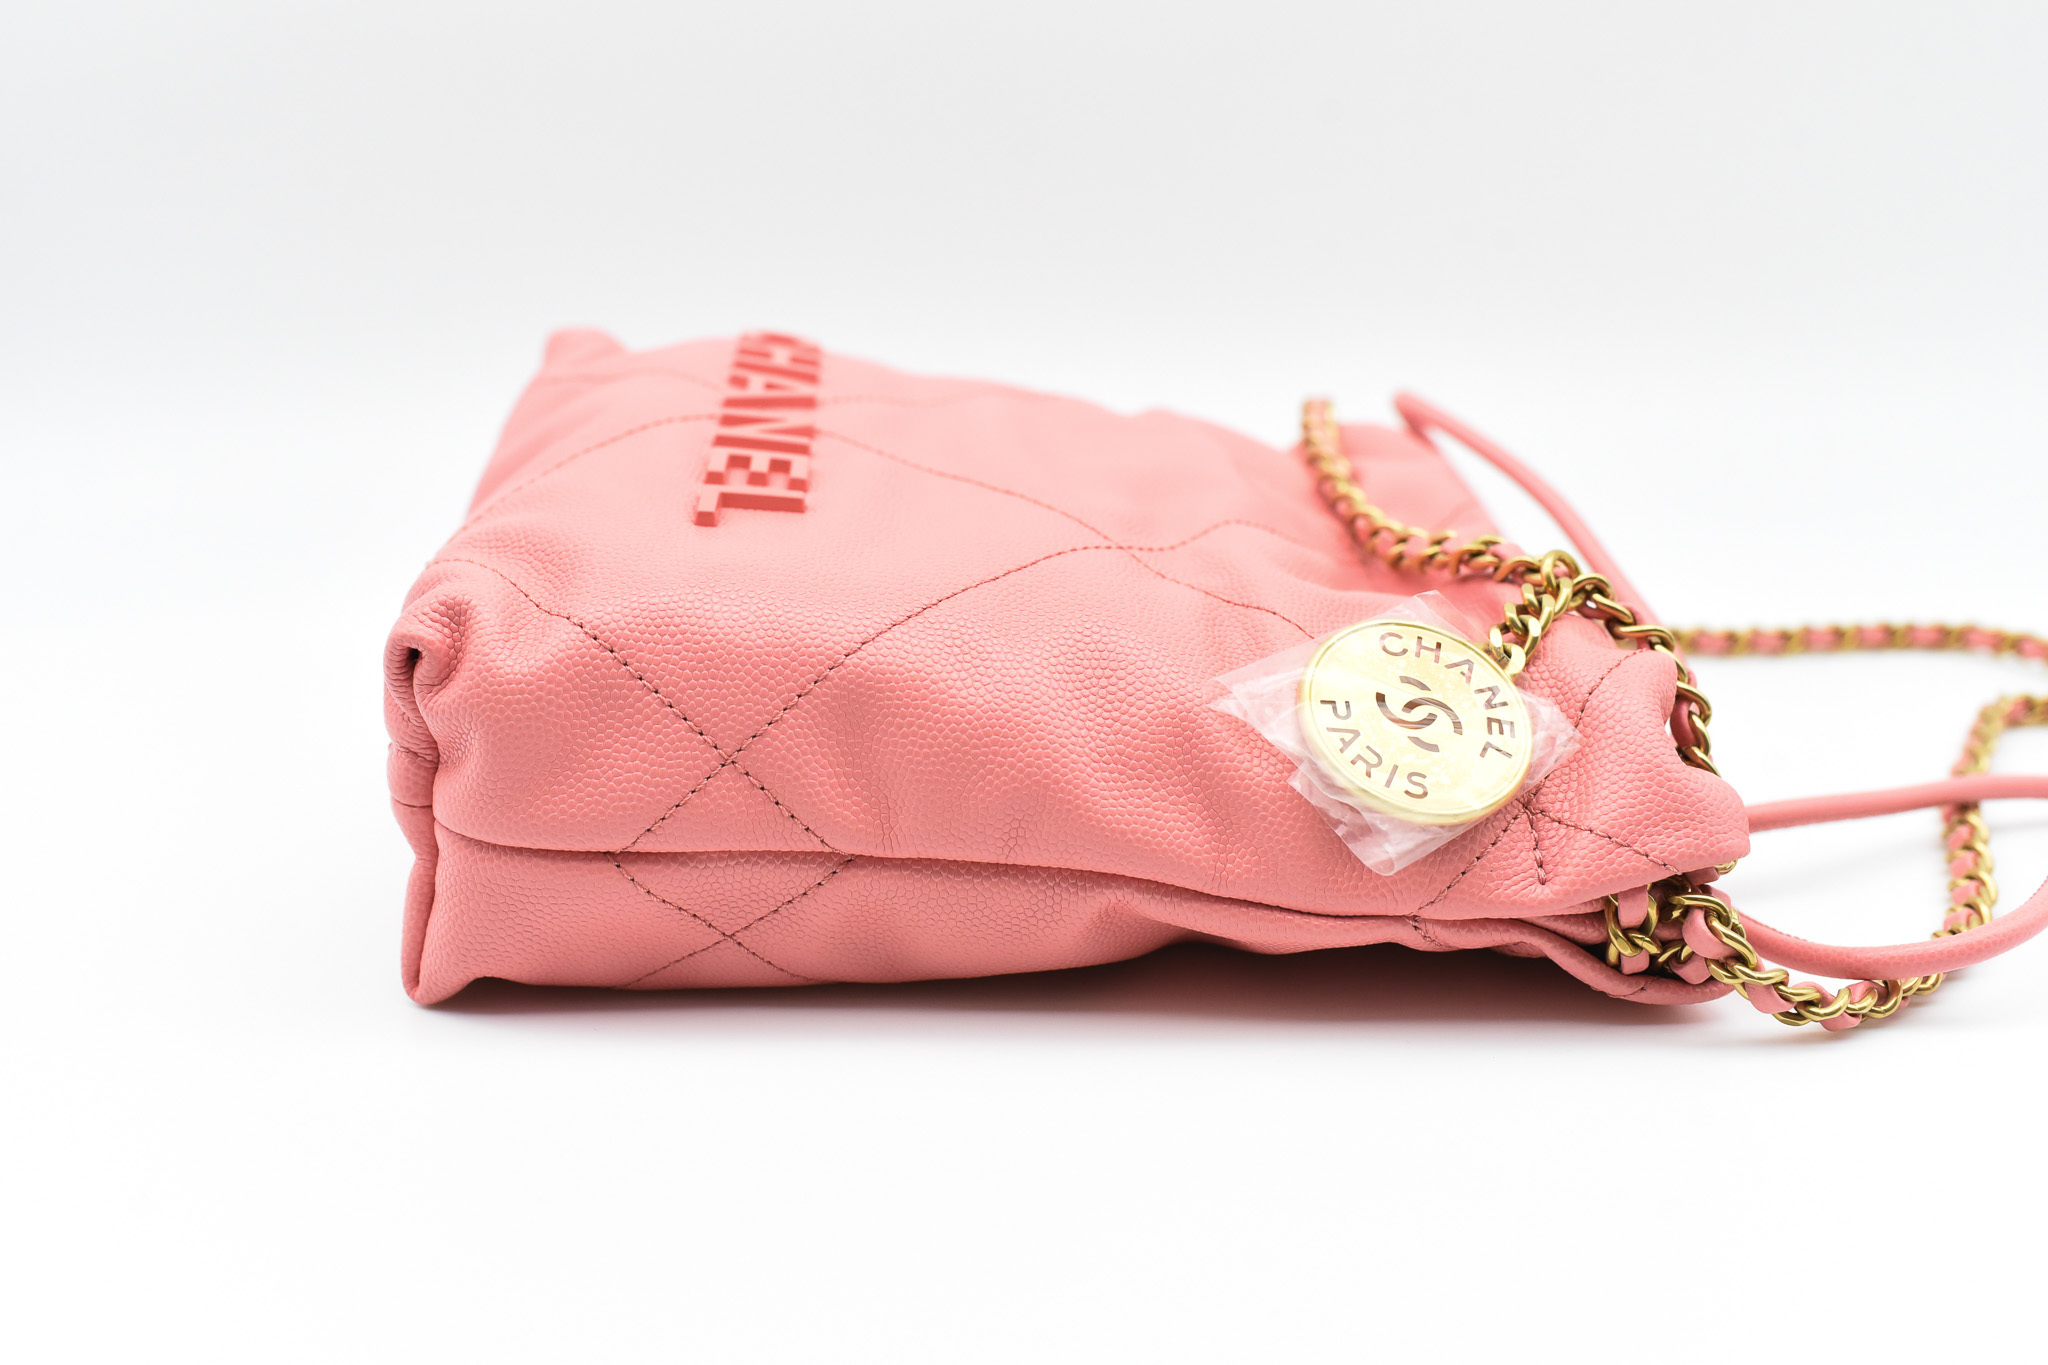 Chanel Round Top Handle Bag, Pink Caviar Leather, Gold Hardware, New in Box  MA001 - Julia Rose Boston